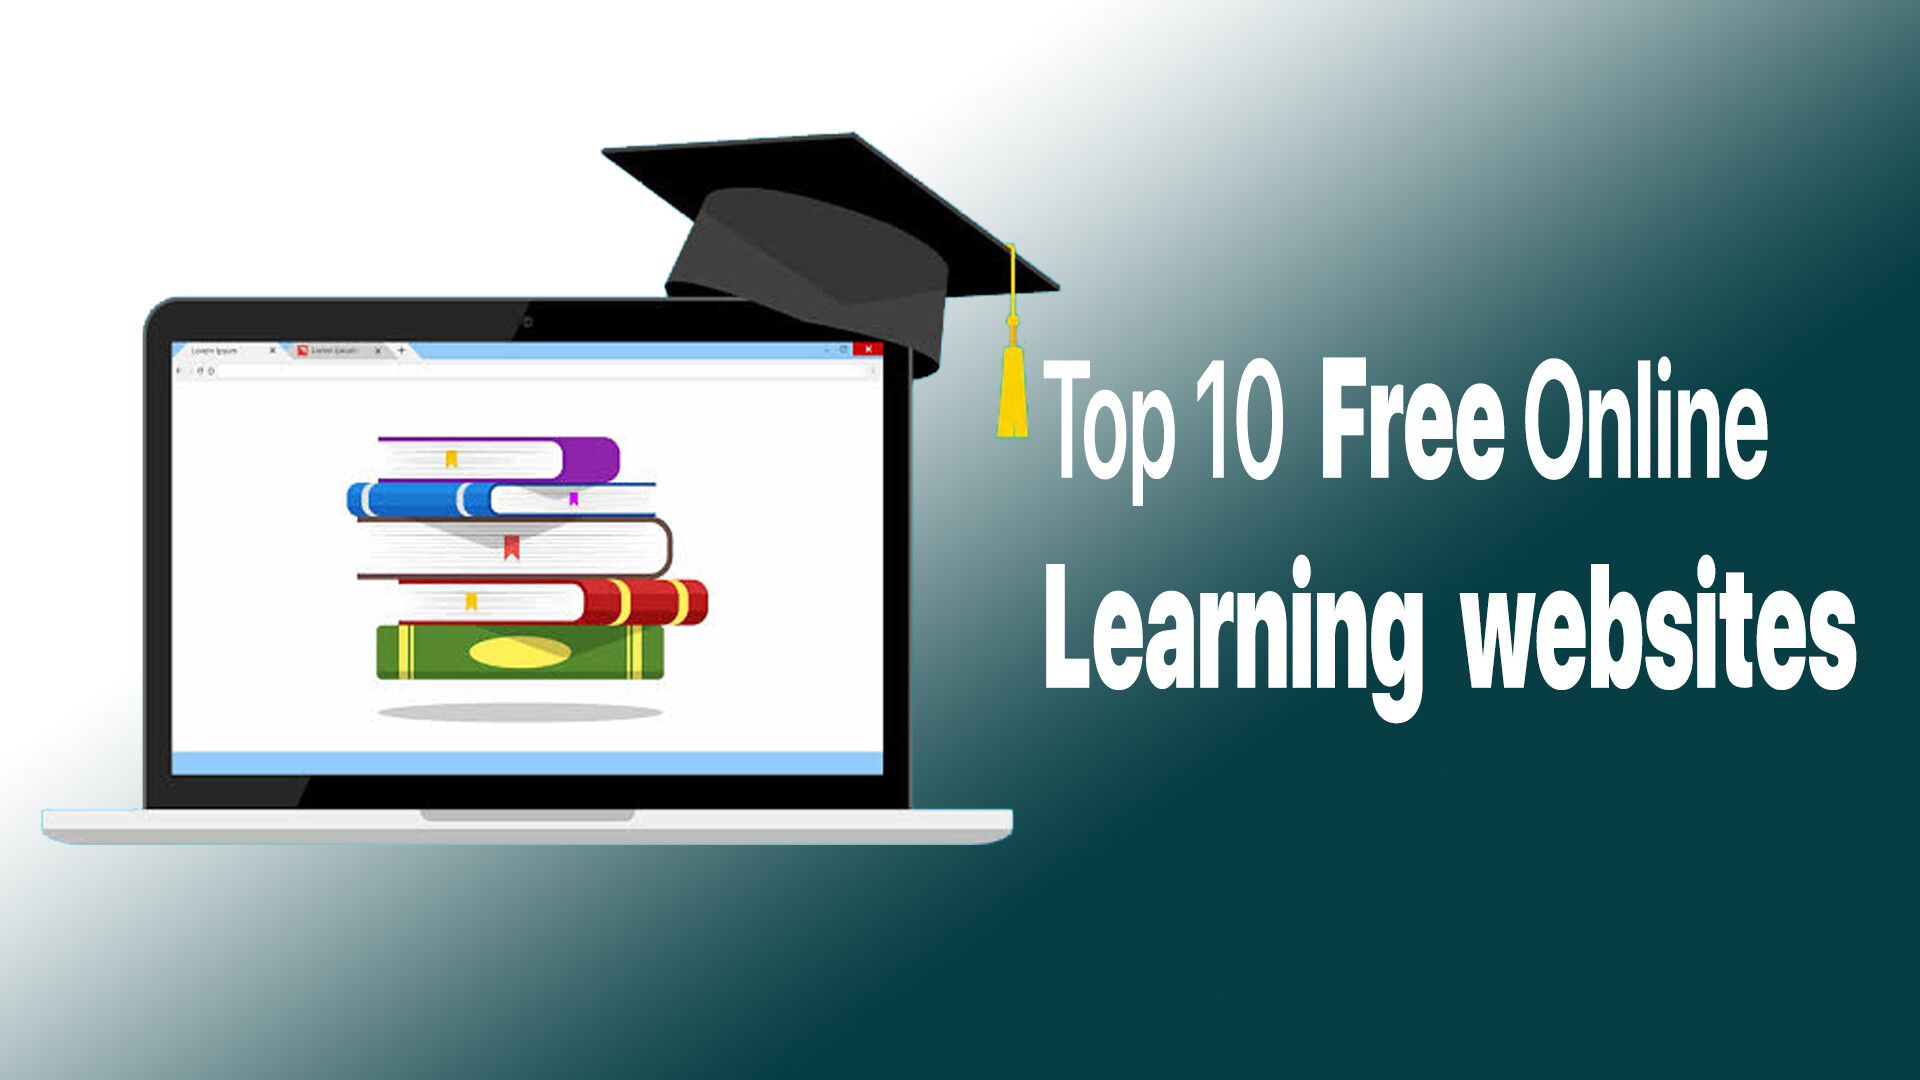 websites to learn free online courses